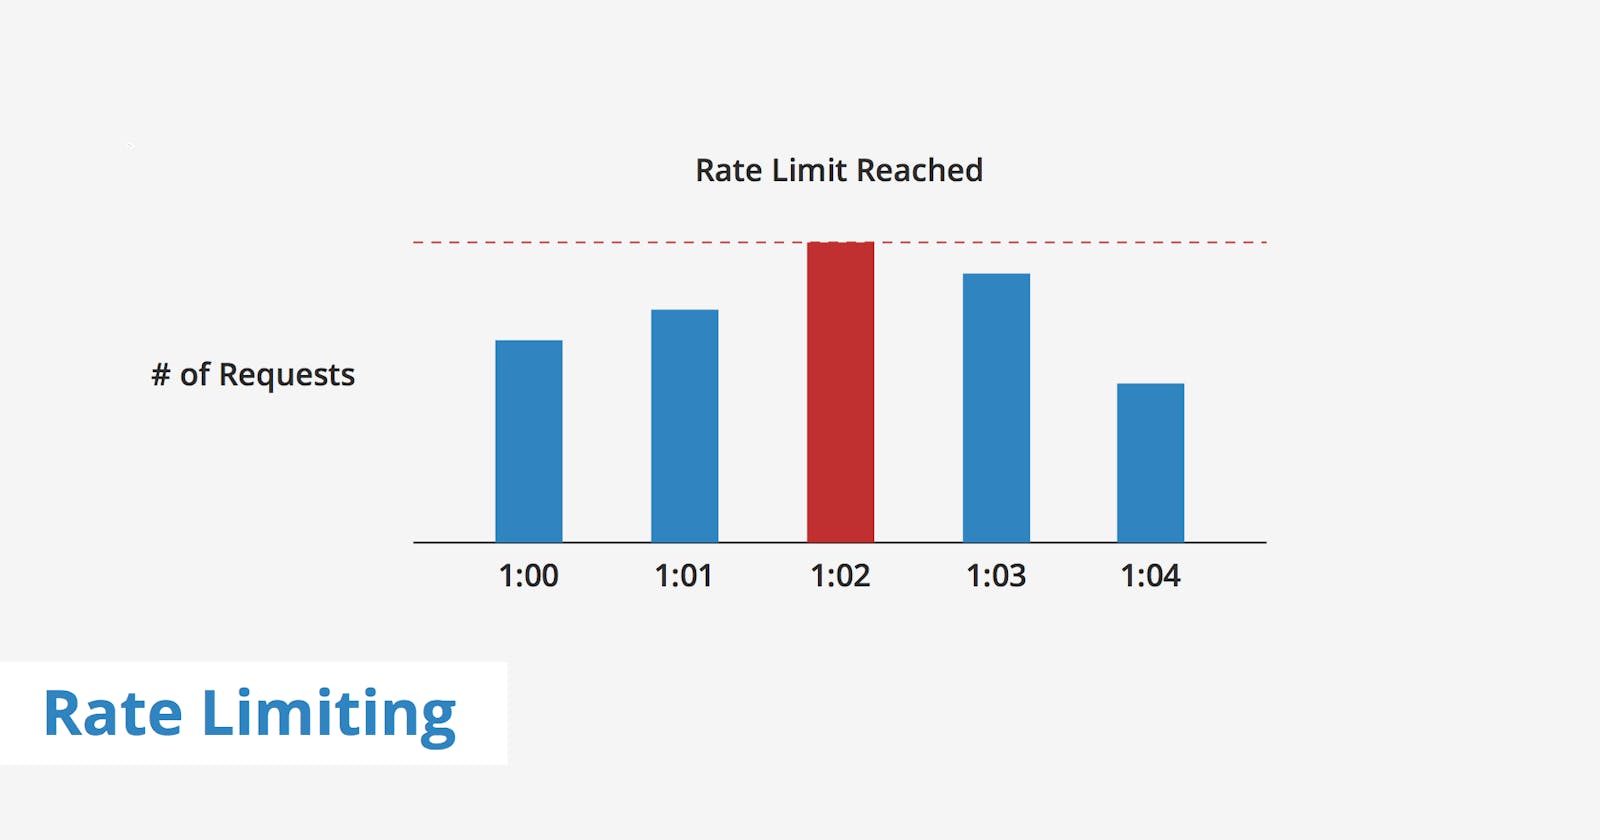 Rate limiting in distributed systems